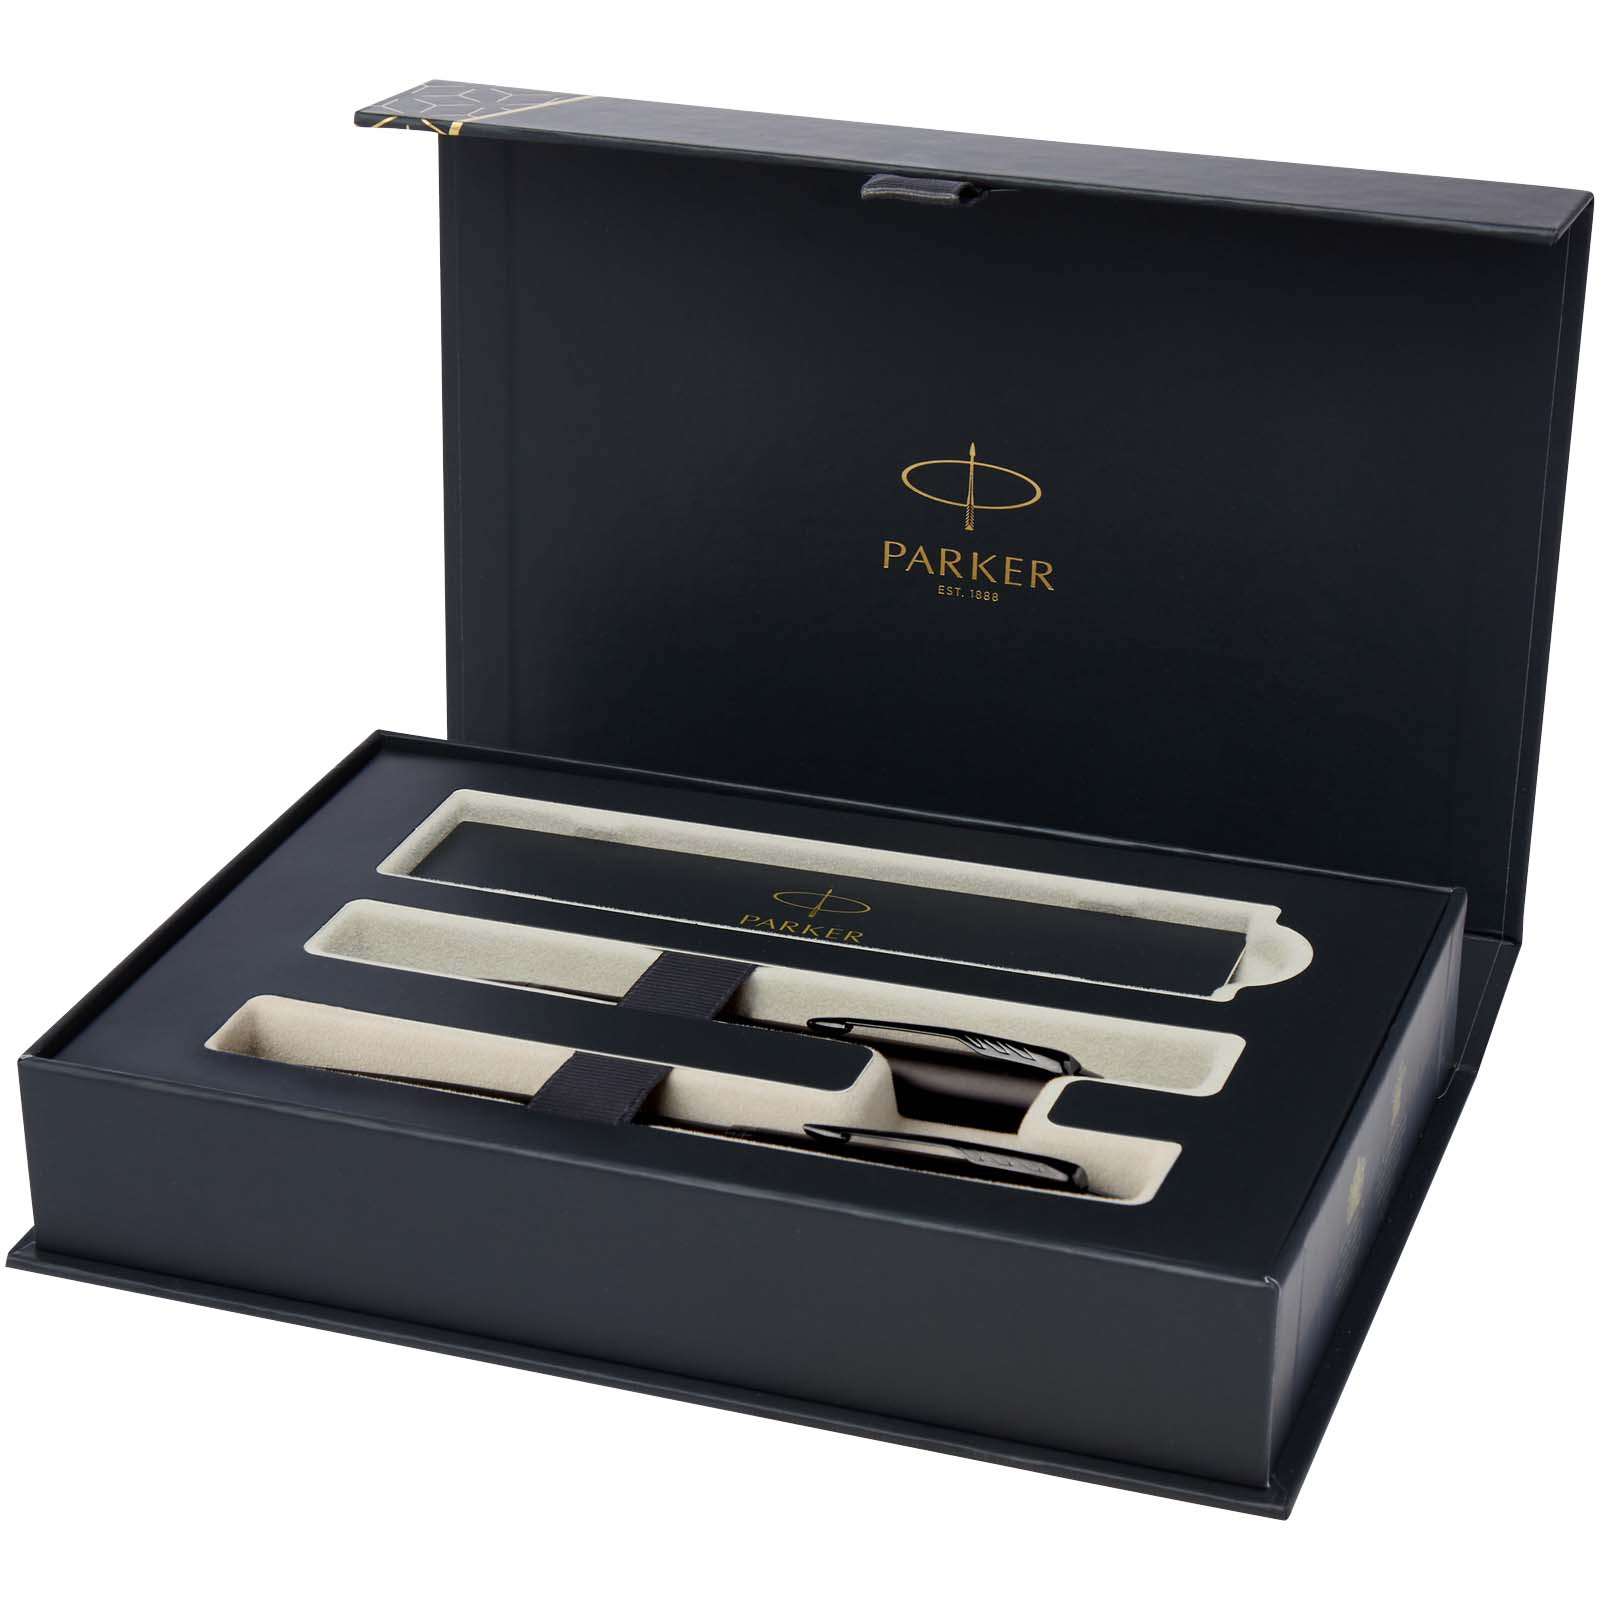 Pens & Writing - Parker IM achromatic ballpoint and rollerball pen set with gift box